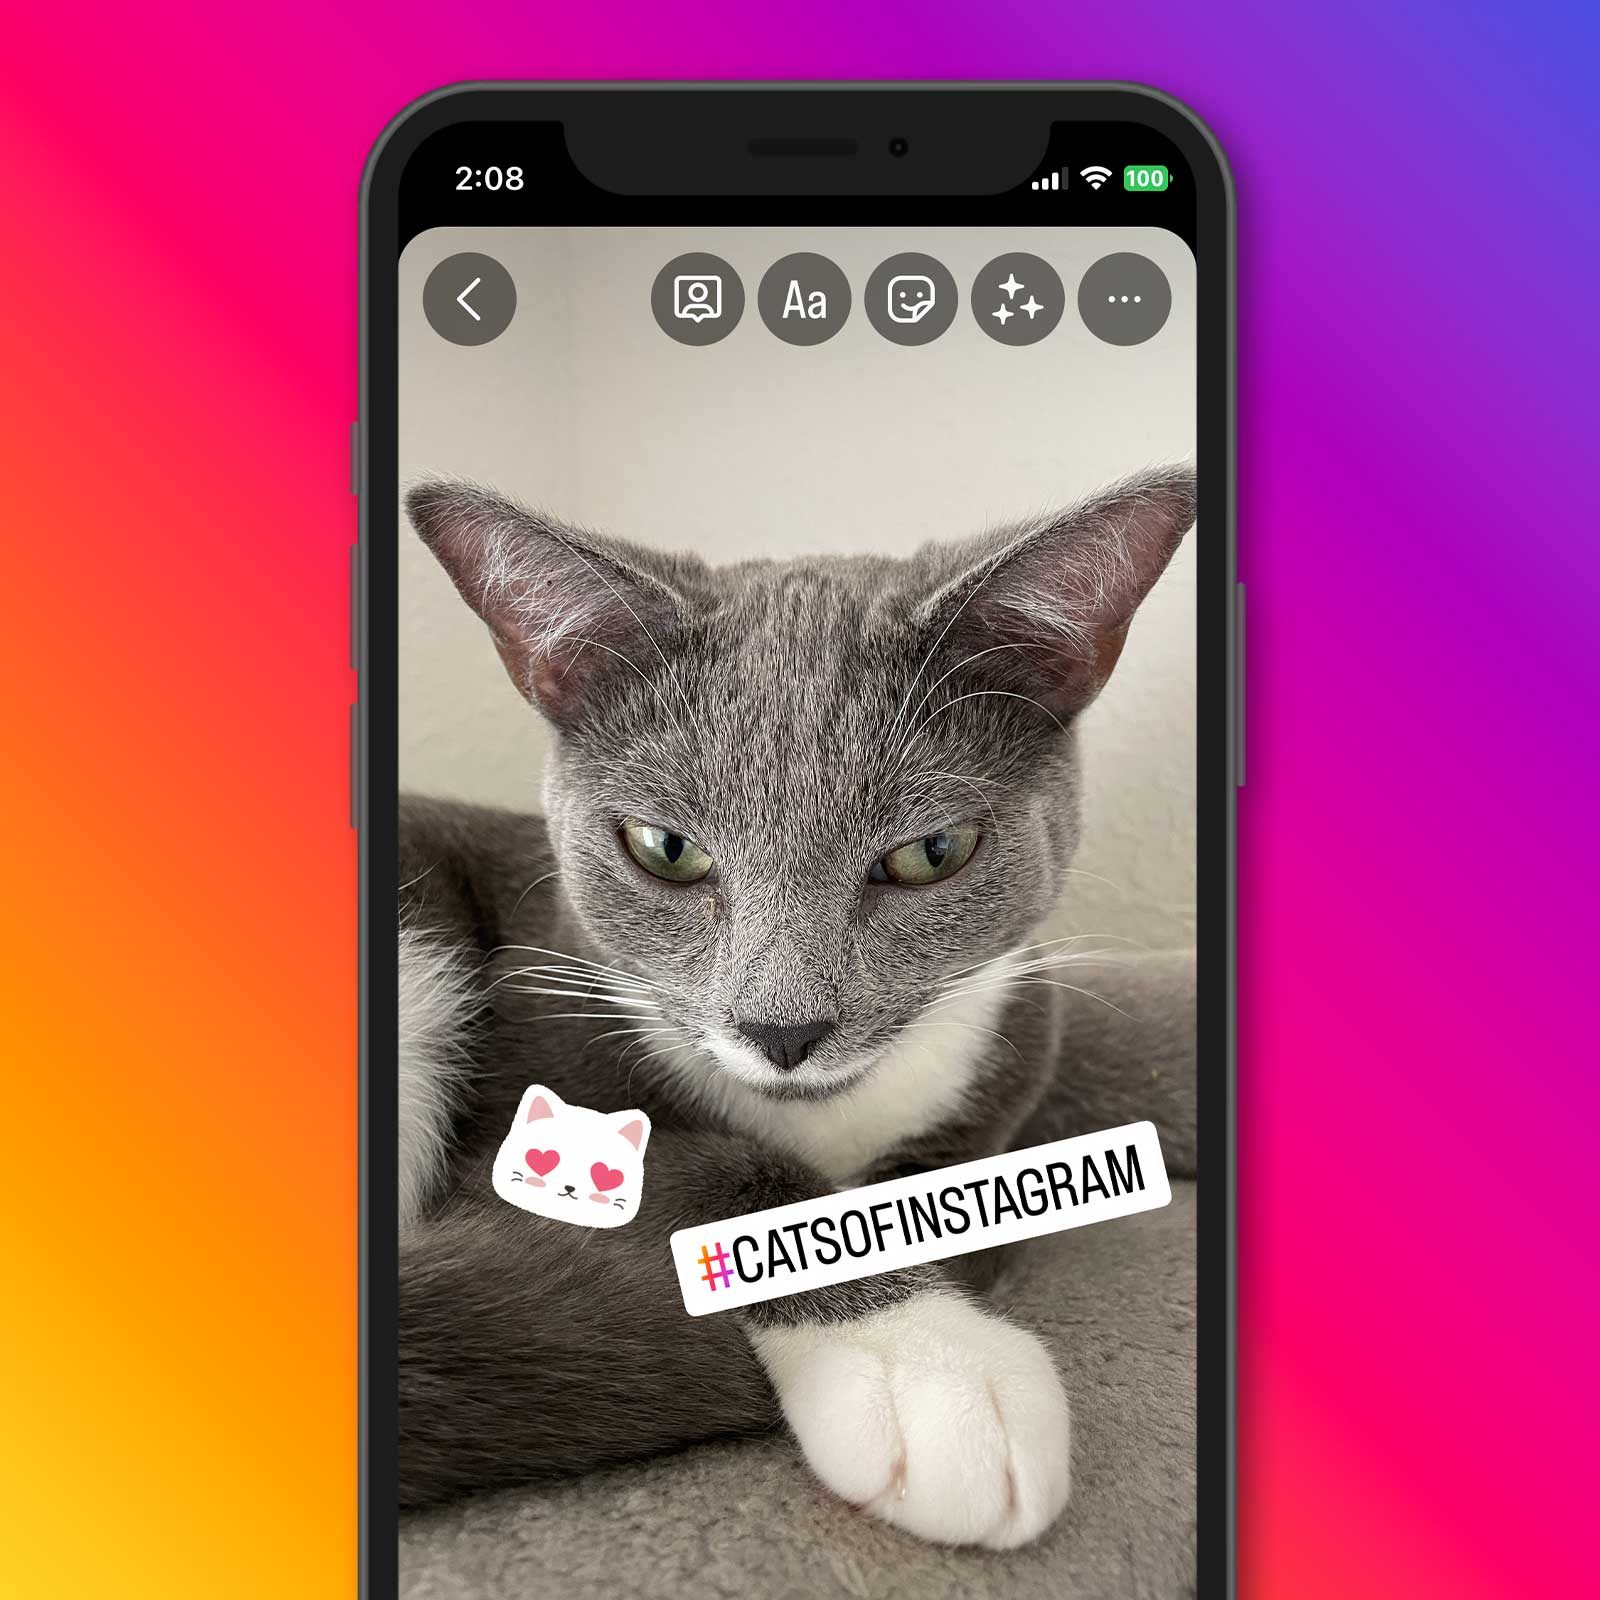 Instagram's new group chats sticker for Stories lets your